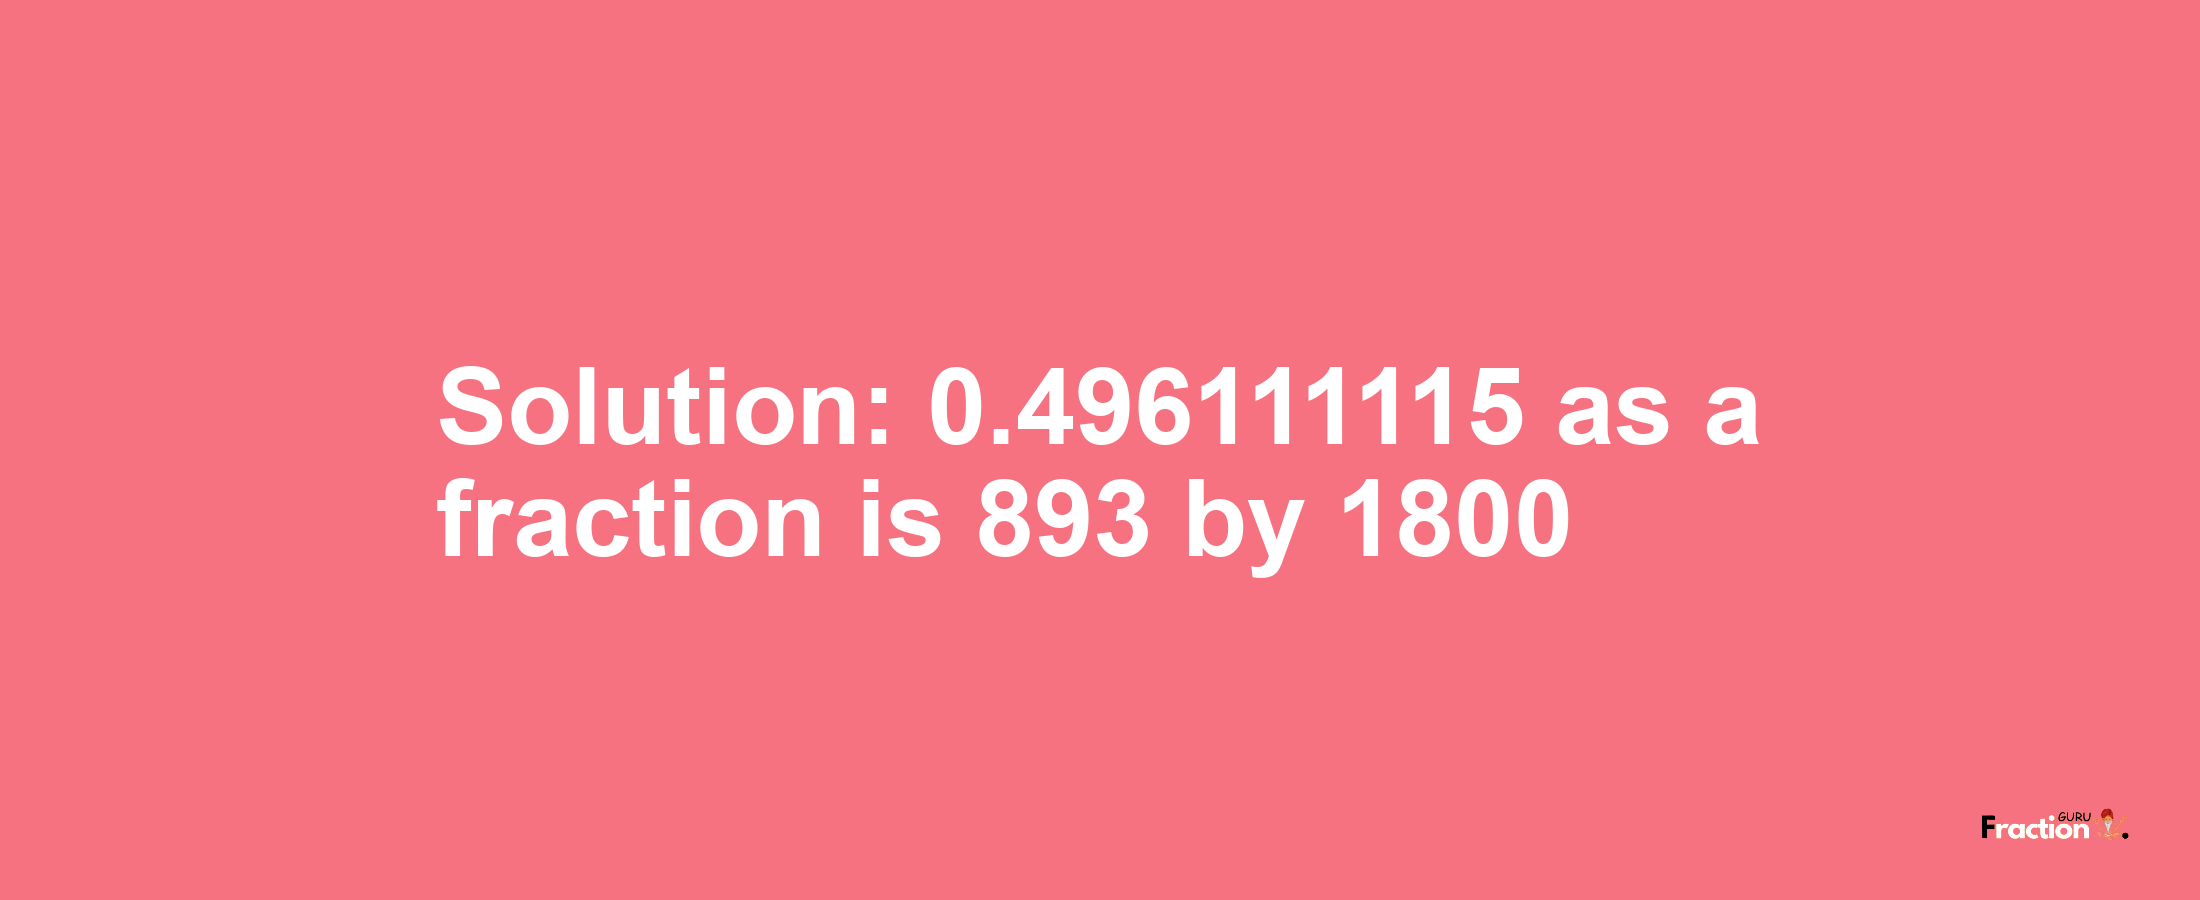 Solution:0.496111115 as a fraction is 893/1800